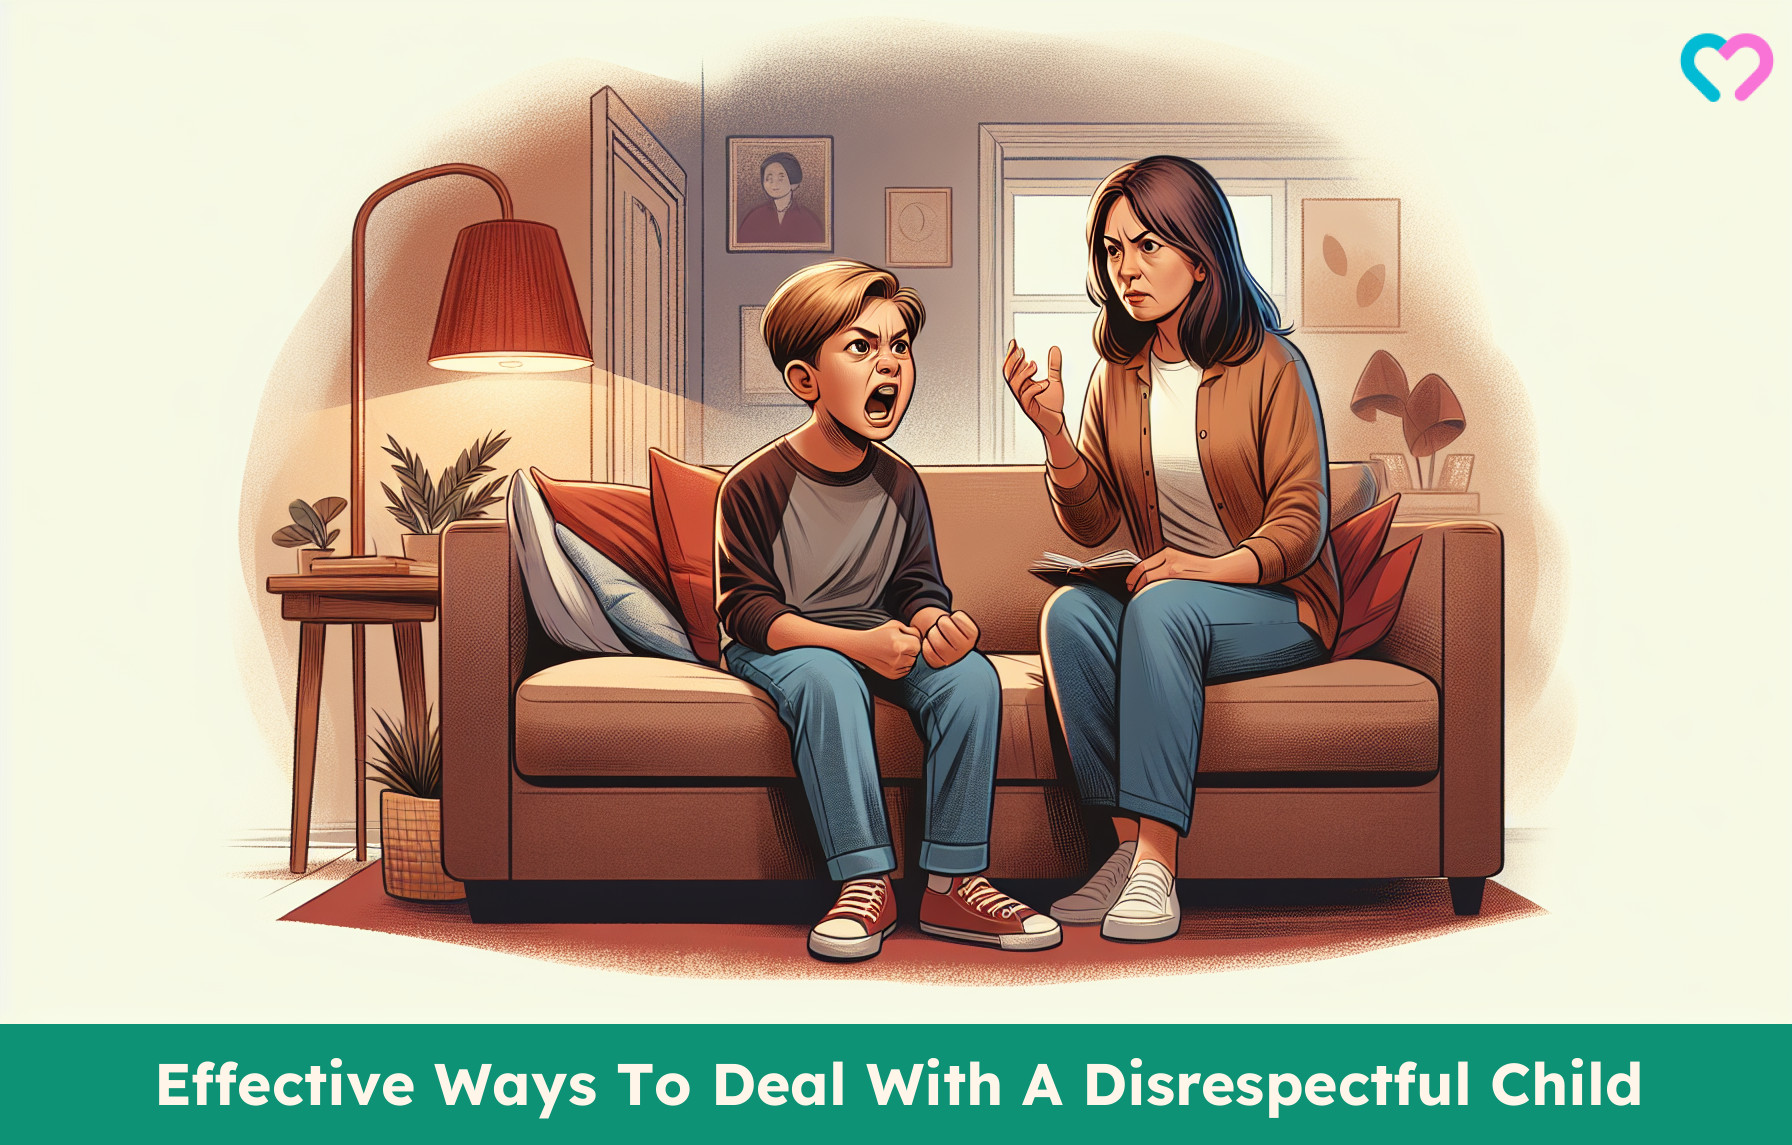 How To Deal With Disrespectful Child_illustration